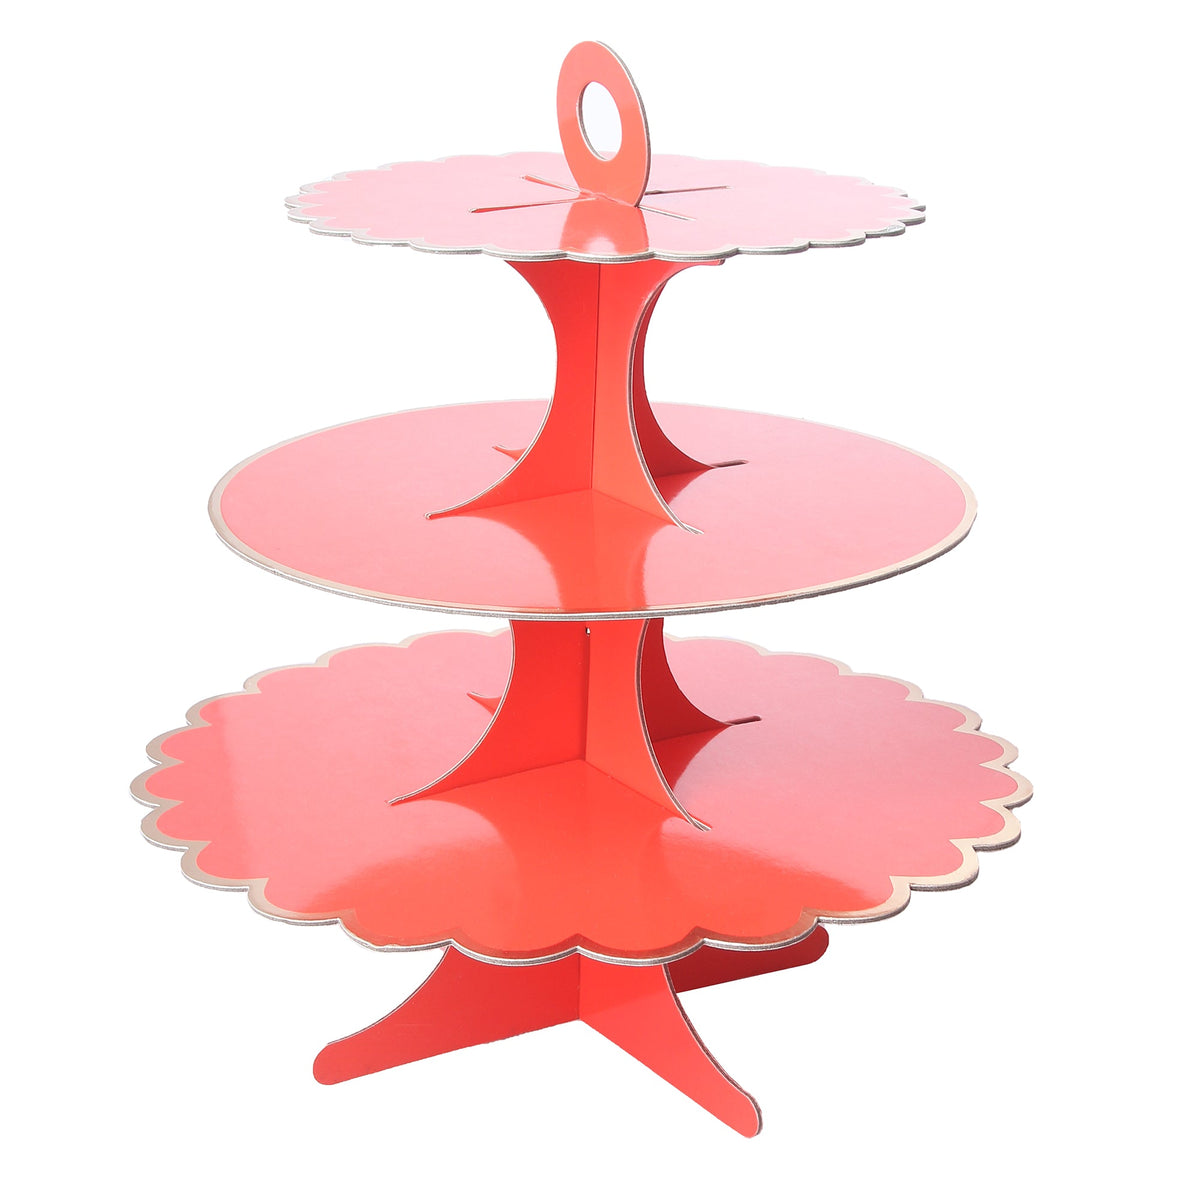 YIWU SANDY PAPER PRODUCTS CO., LTD Cake Supplies Cupcake Stand 3 Tiers, Red, 1 Count 810120712758